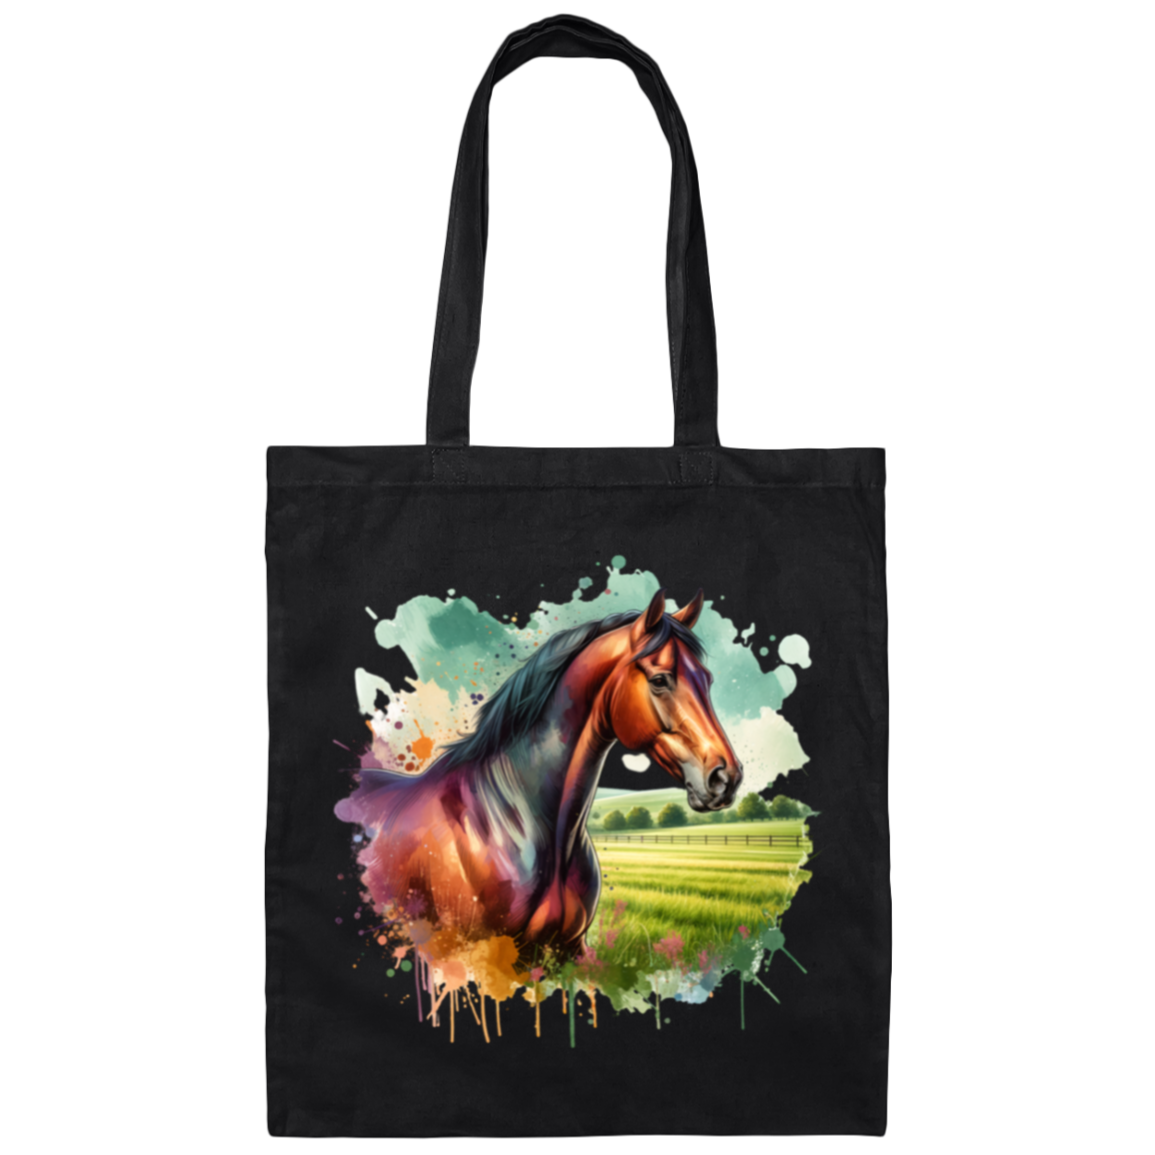 Bay Horse with Field - Canvas Tote Bag